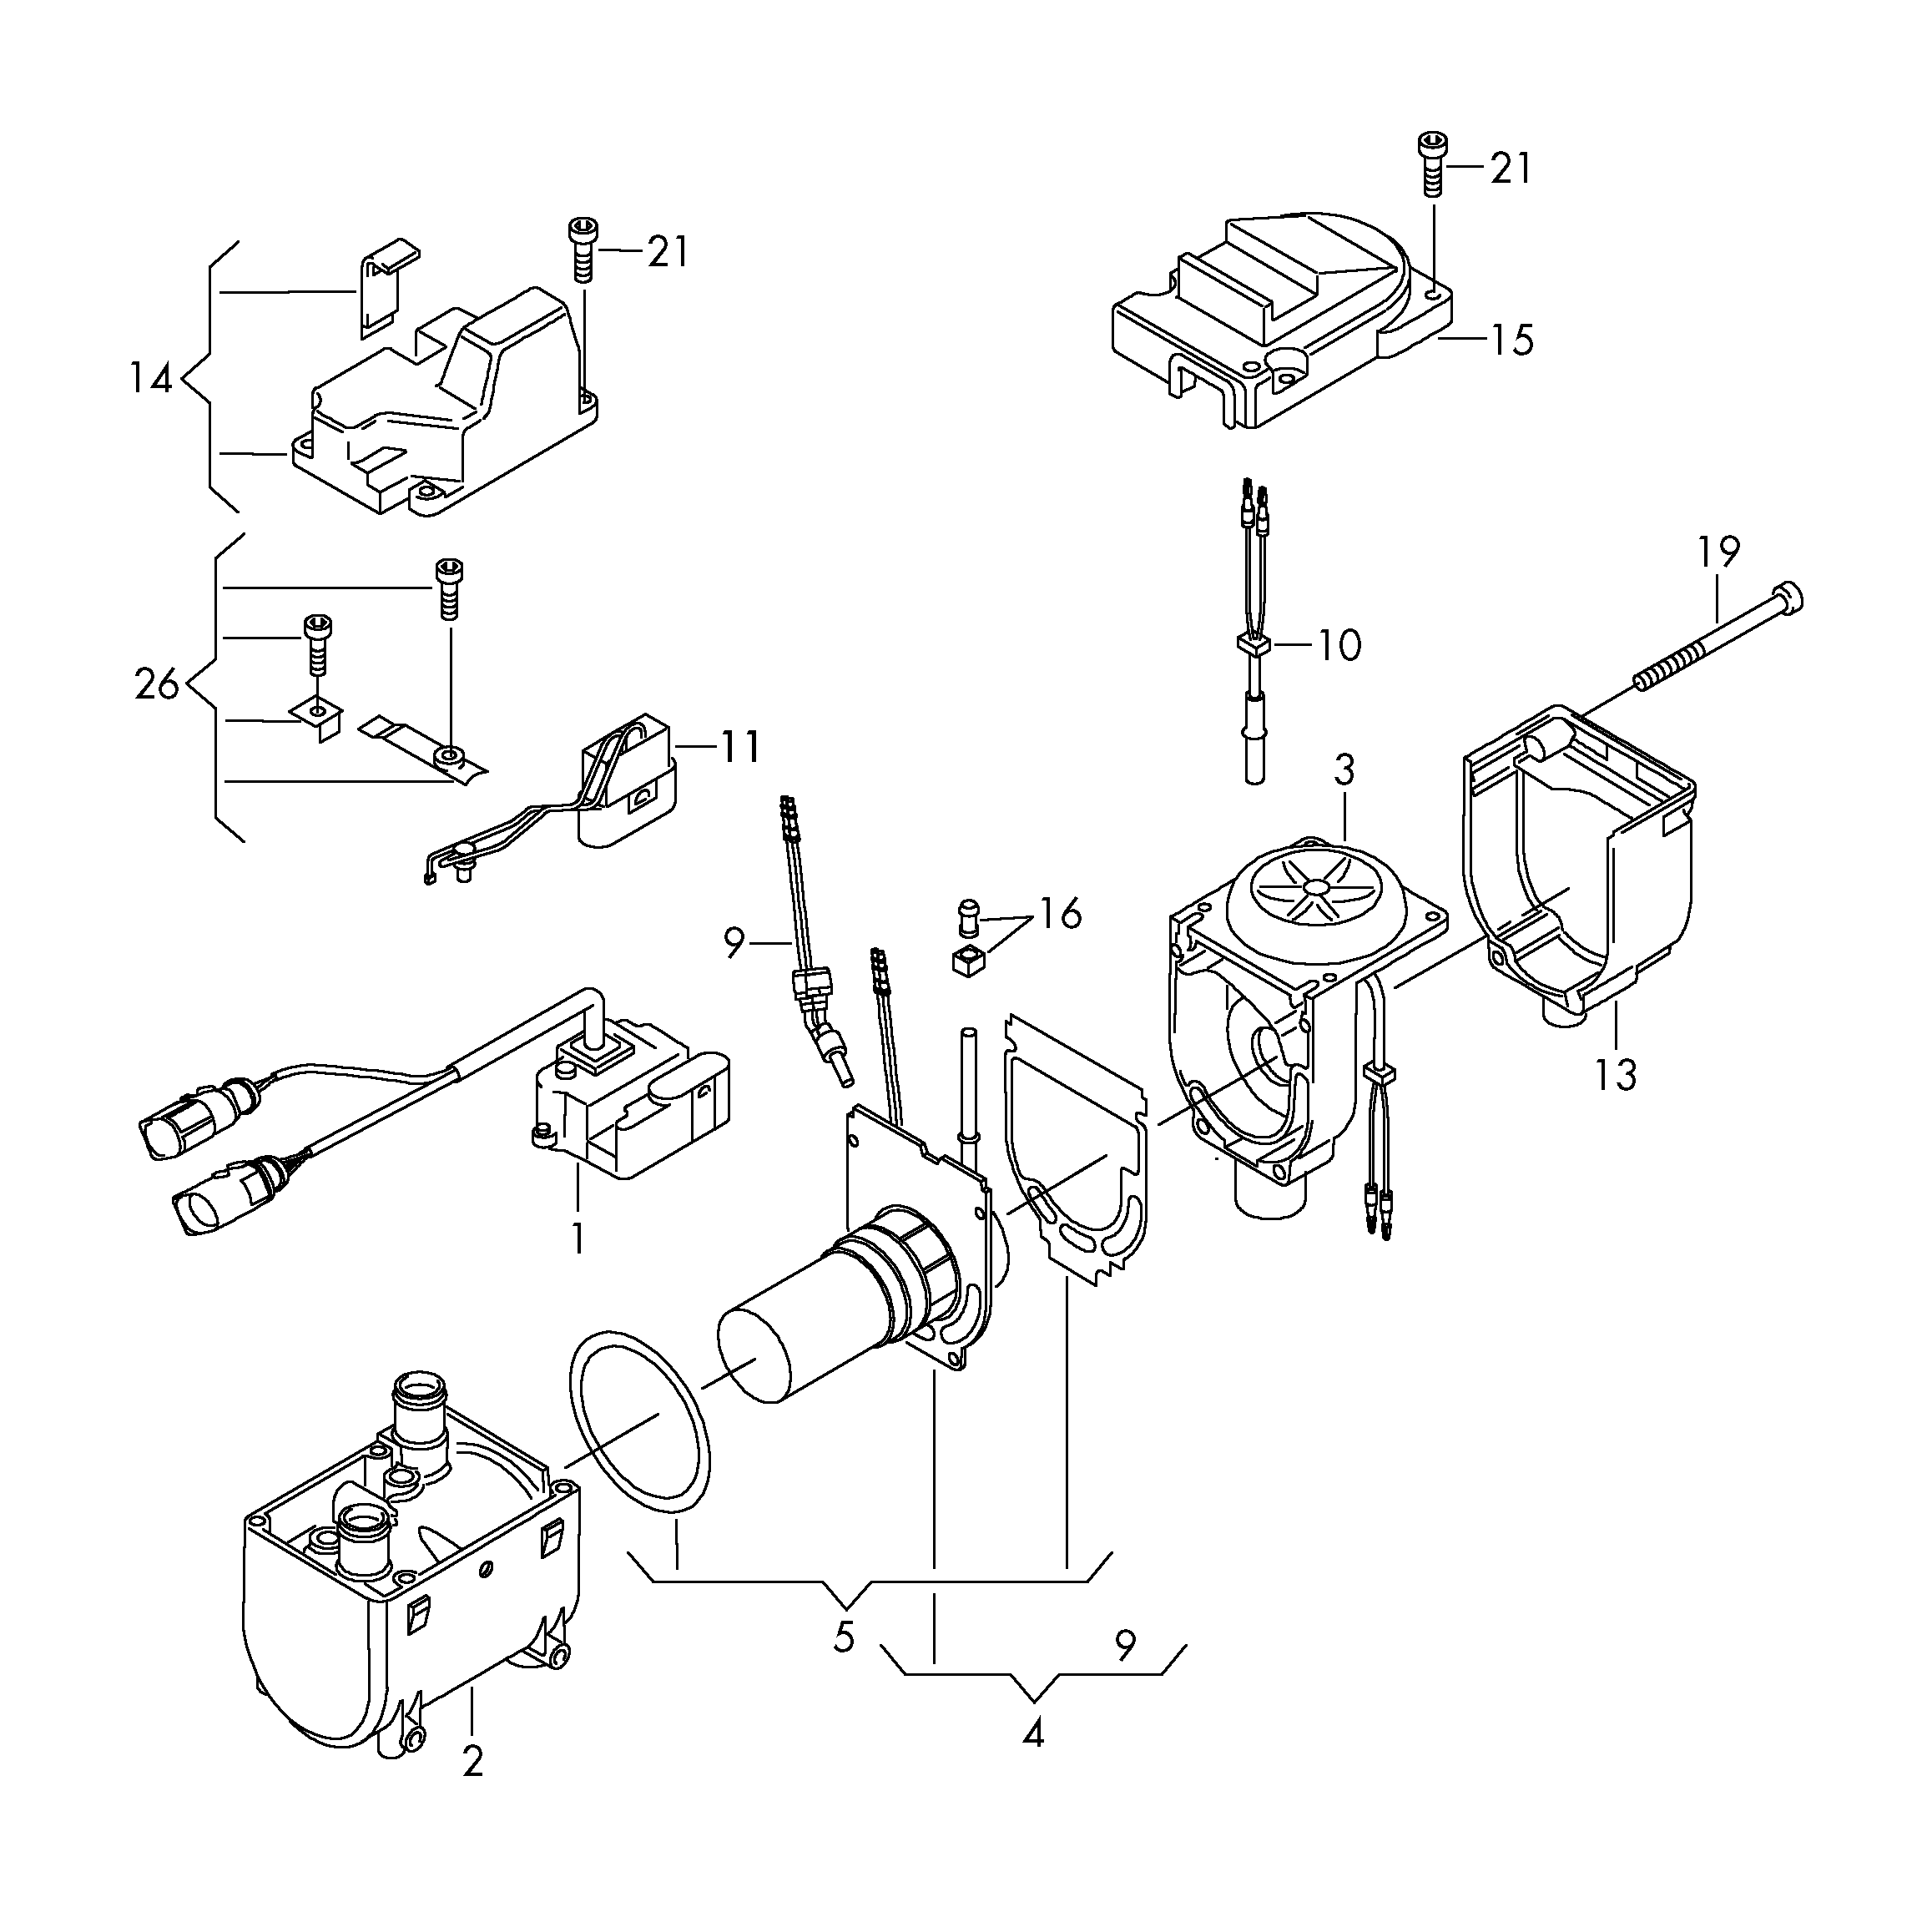 Individual partsAuxiliary heater for water<br>circuitAuxiliary heater for coolant<br>circuit  - Touareg - toua